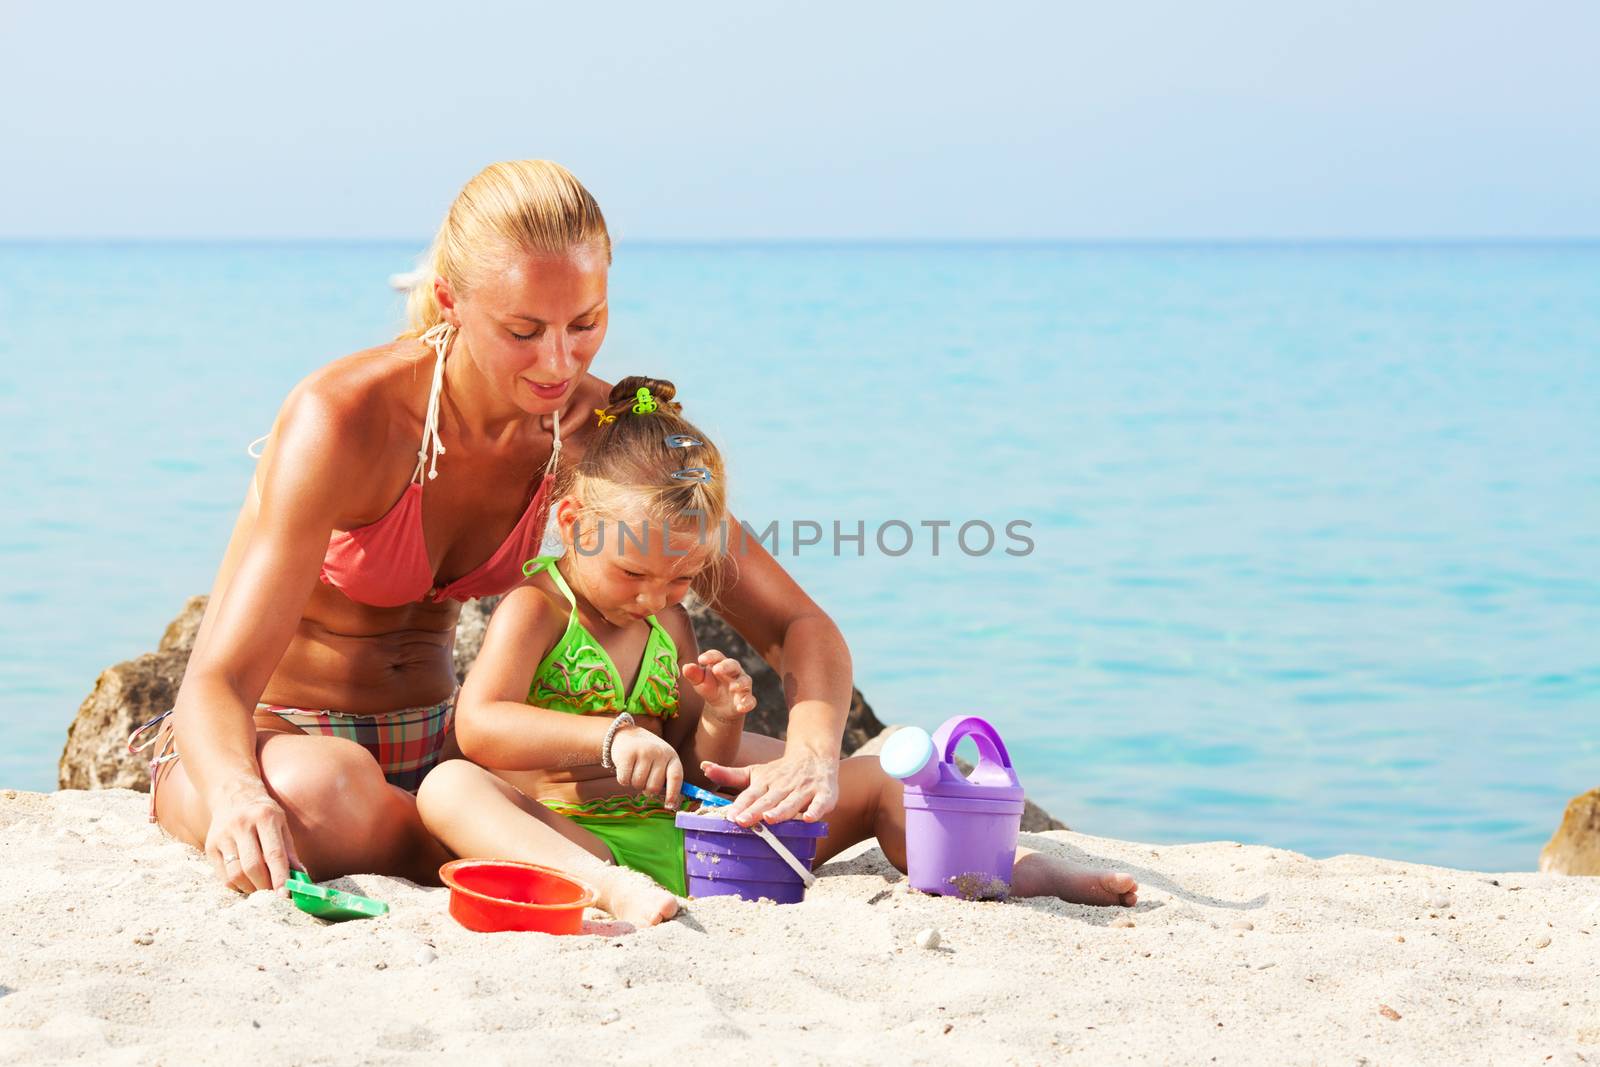 Playing on the beach by MilanMarkovic78